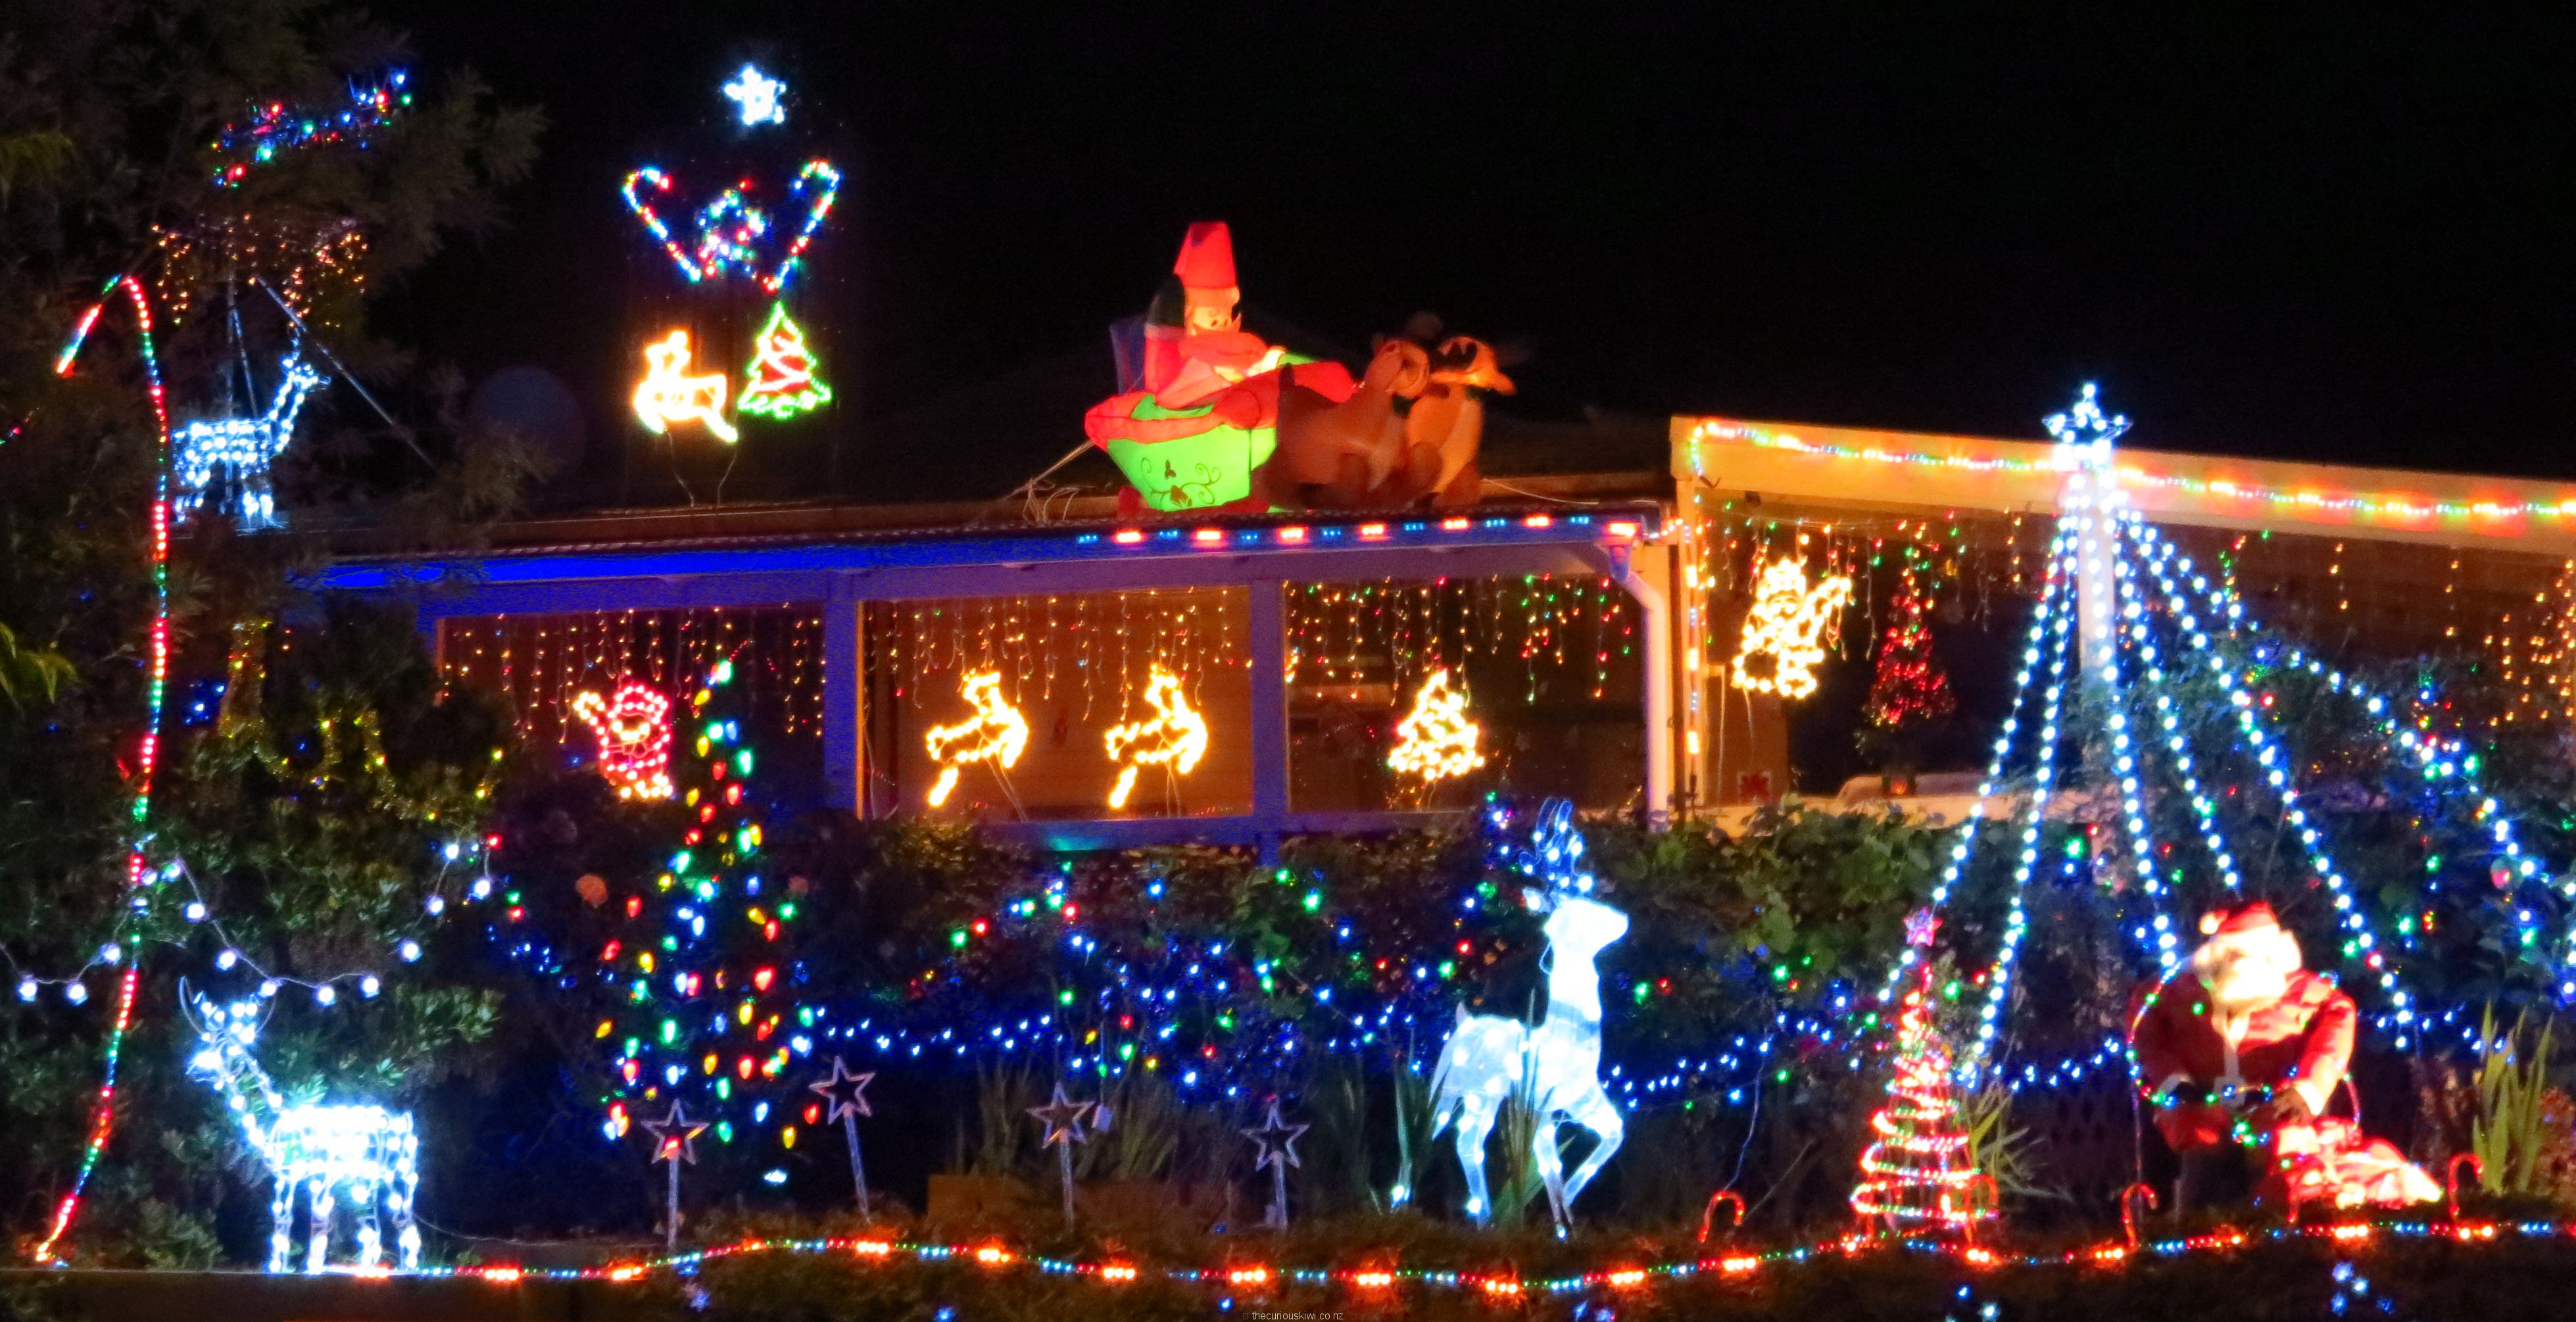 Merry Christmas in lights from Rotorua | thecuriouskiwi NZ travel blog